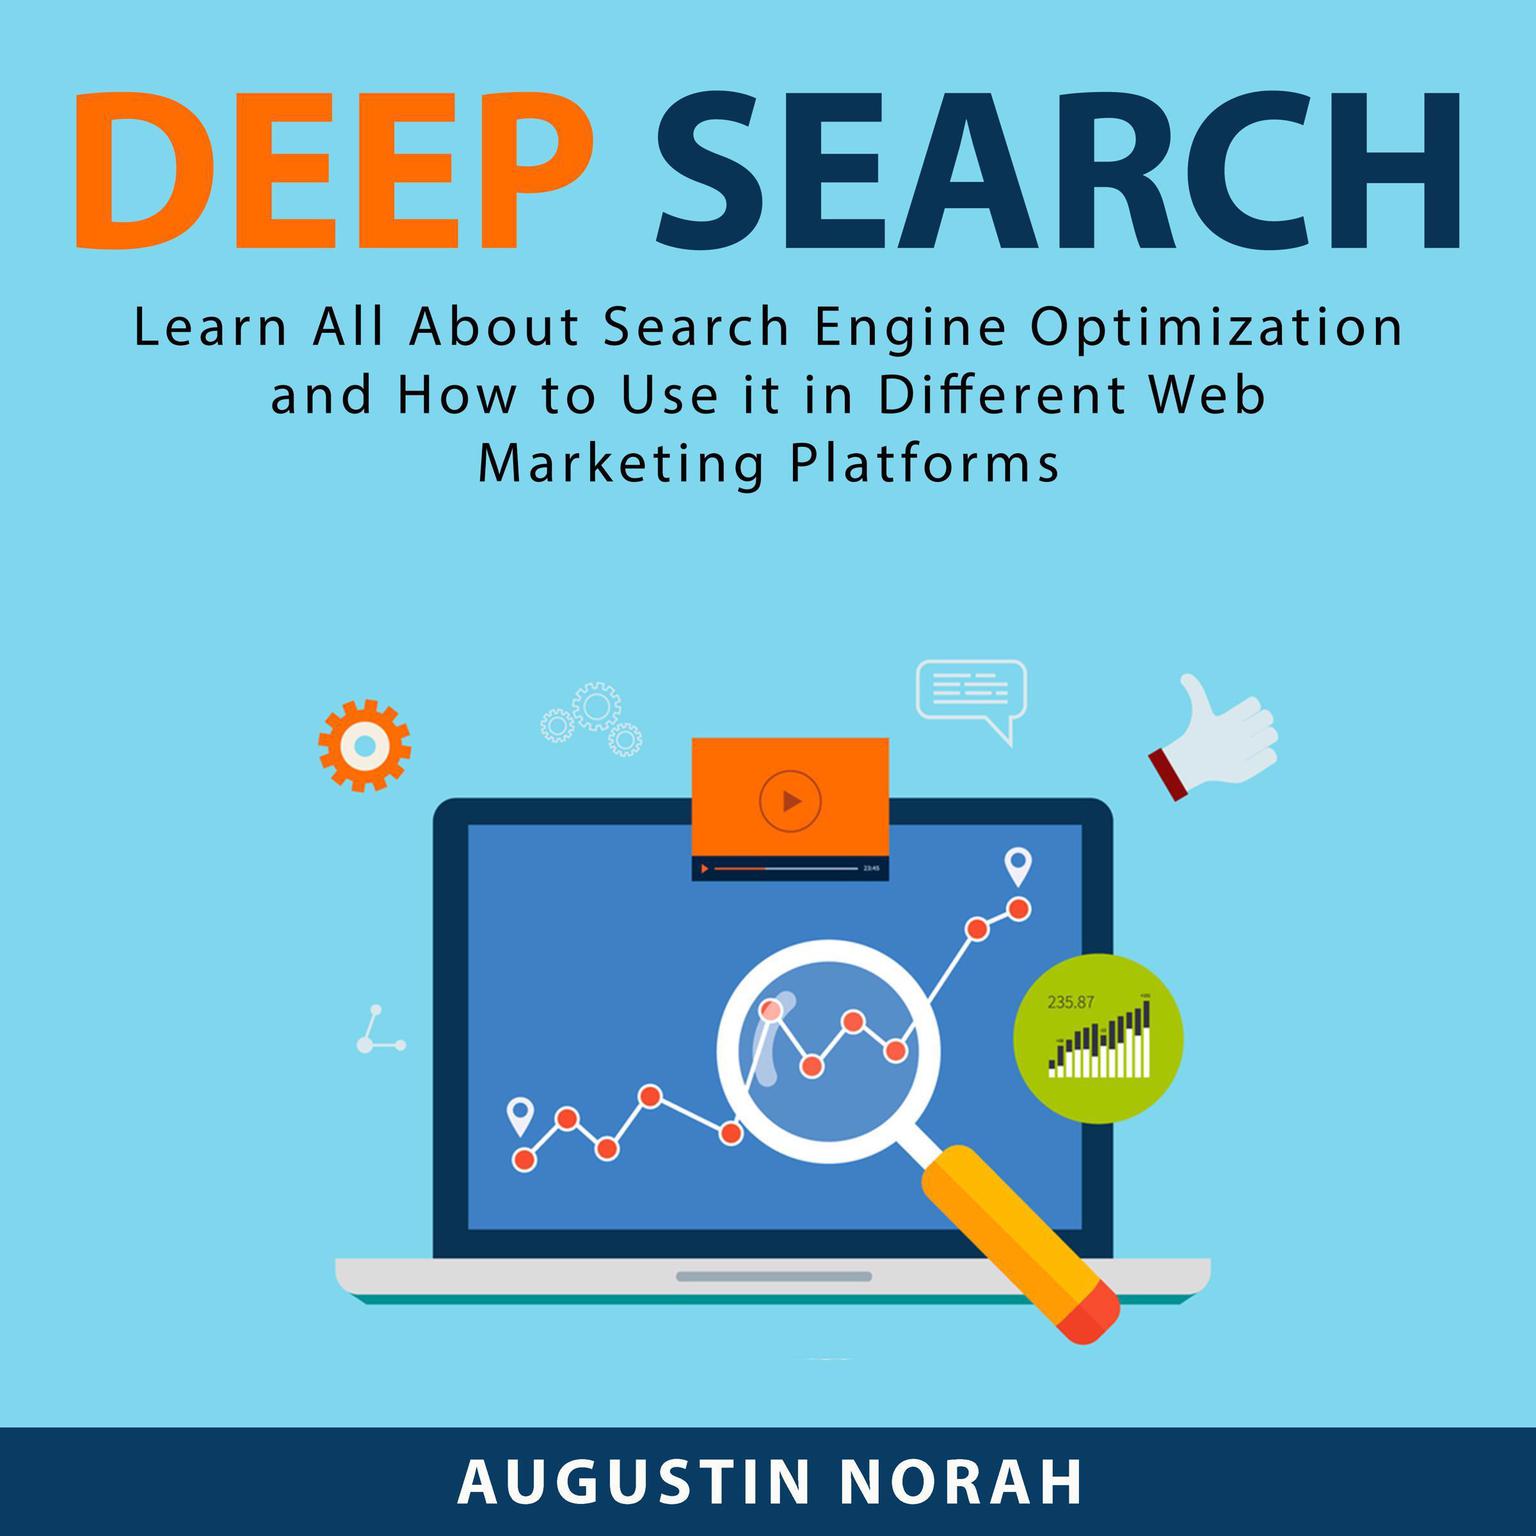 Deep Search: Learn All About Search Engine Optimization and How to Use it in Different Web Marketing Platforms Audiobook, by Augustin Norah